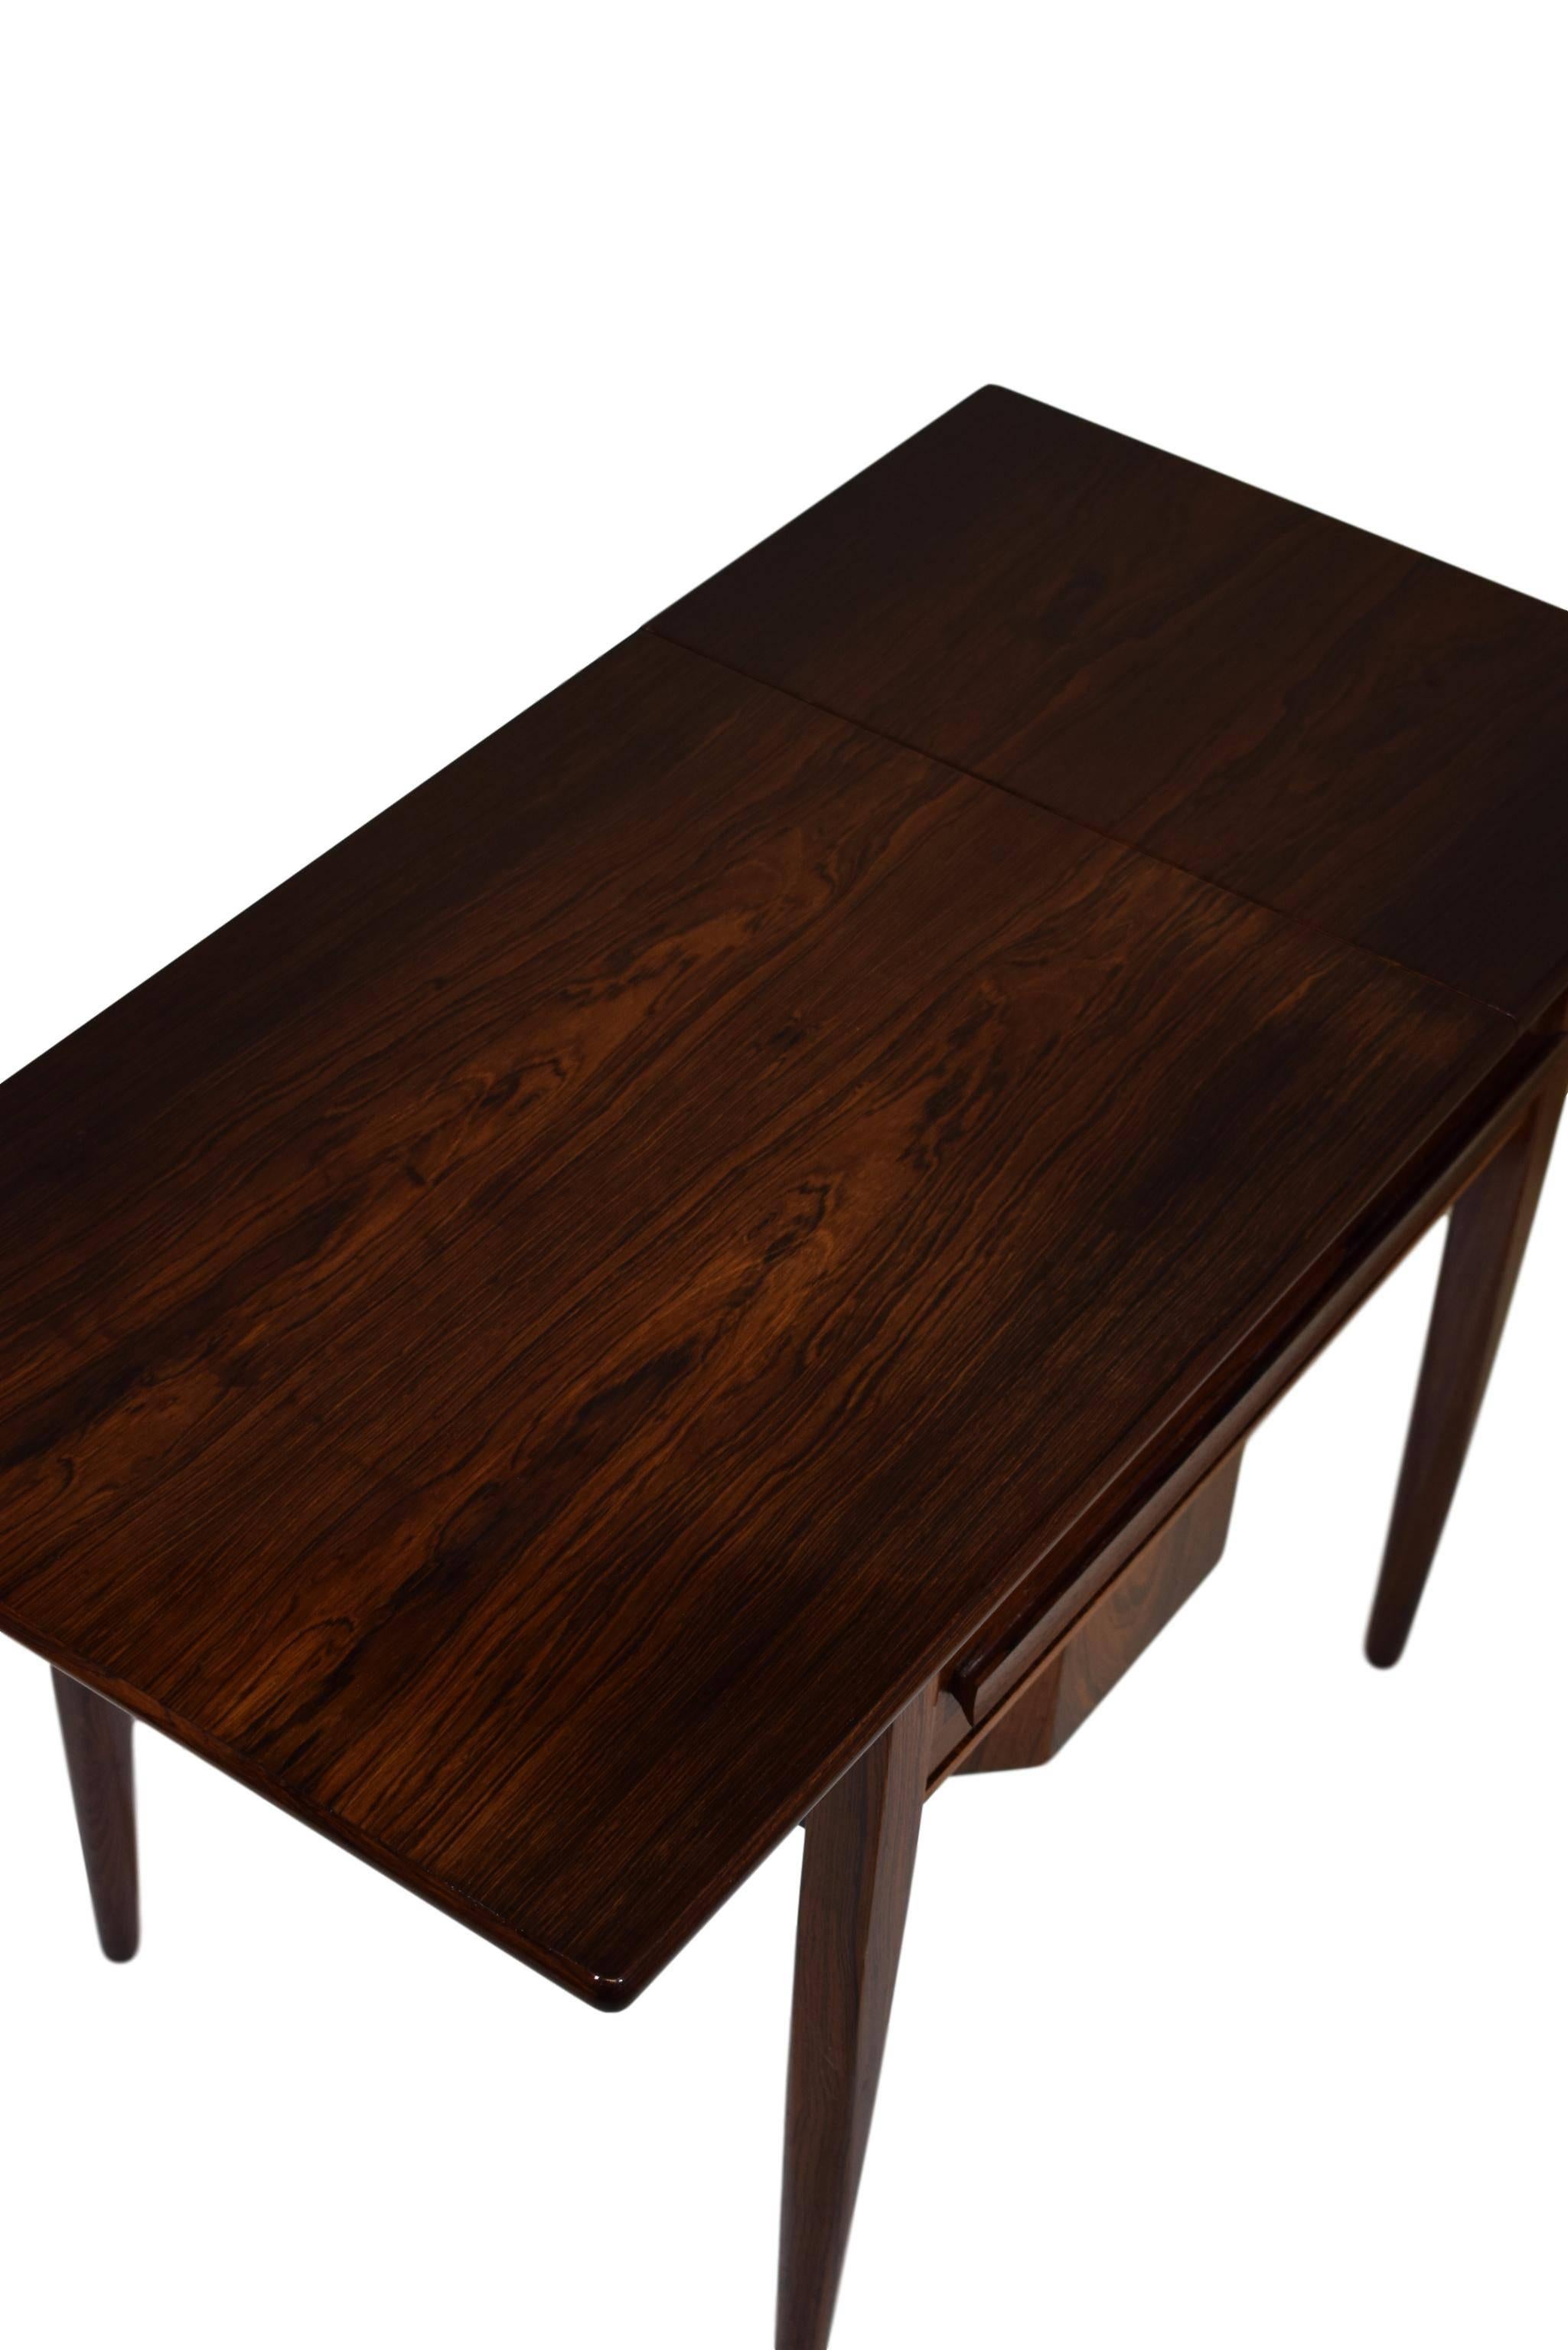 A Danish midcentury sewing table with drop leaf and one drawer for yarns. By Johannes Andersen. Rosewood veneer and tapered solid rosewood legs.
 